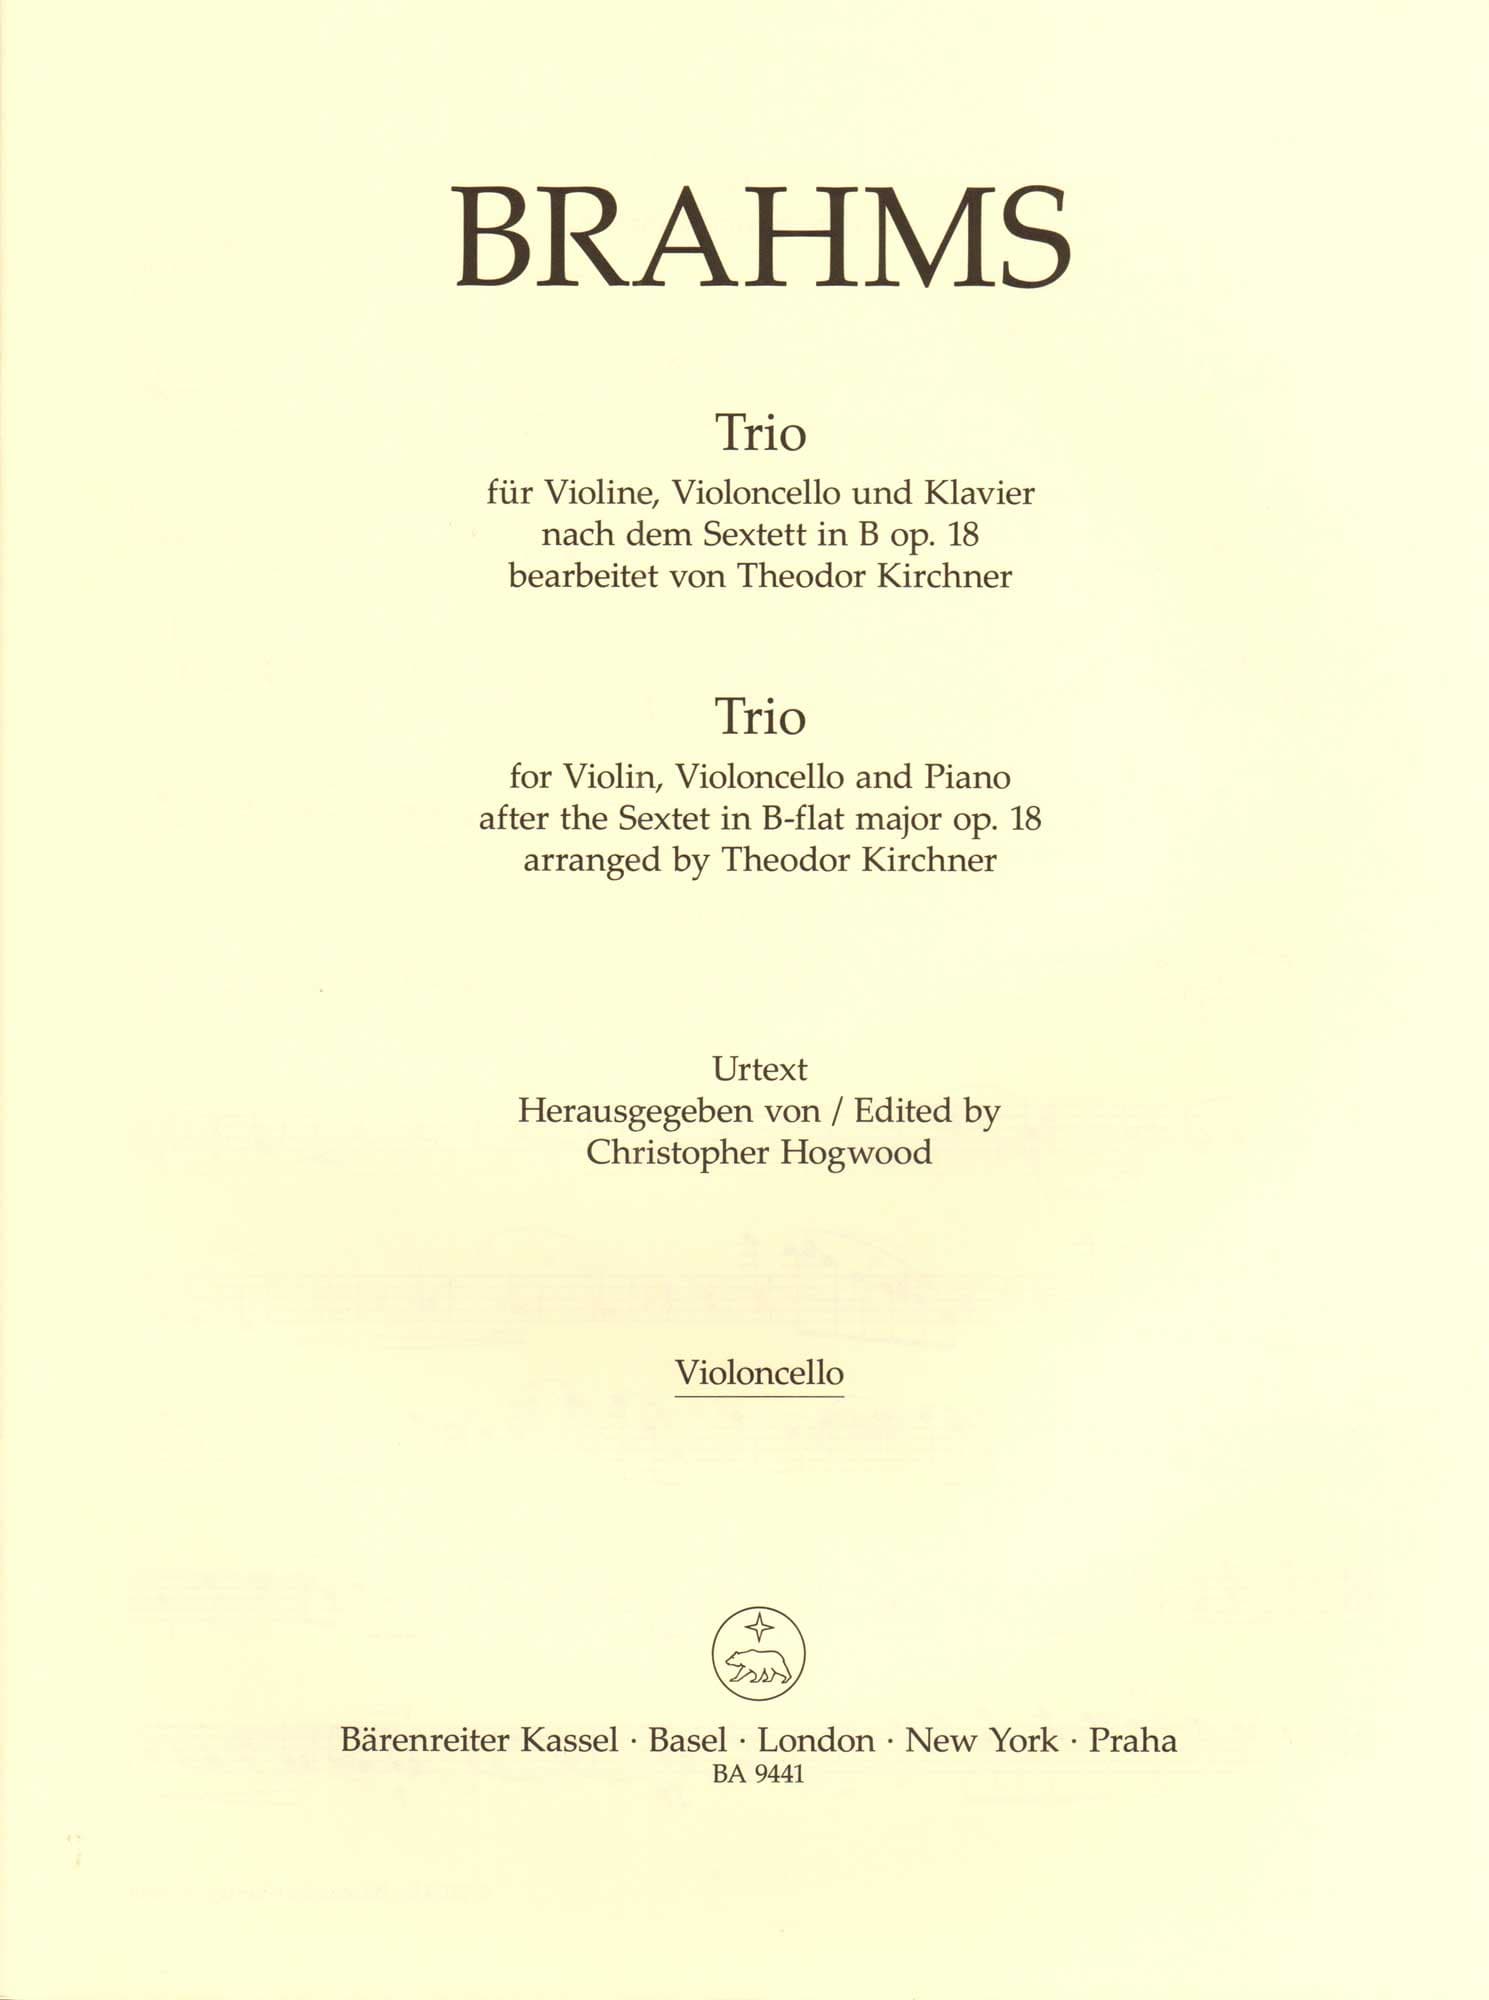 Brahms, Johannes - Trio, after the Sextet in B-flat major, Op. 18 - for Violin, Cello, and Piano - edited by Hogwood - Barenreiter URTEXT